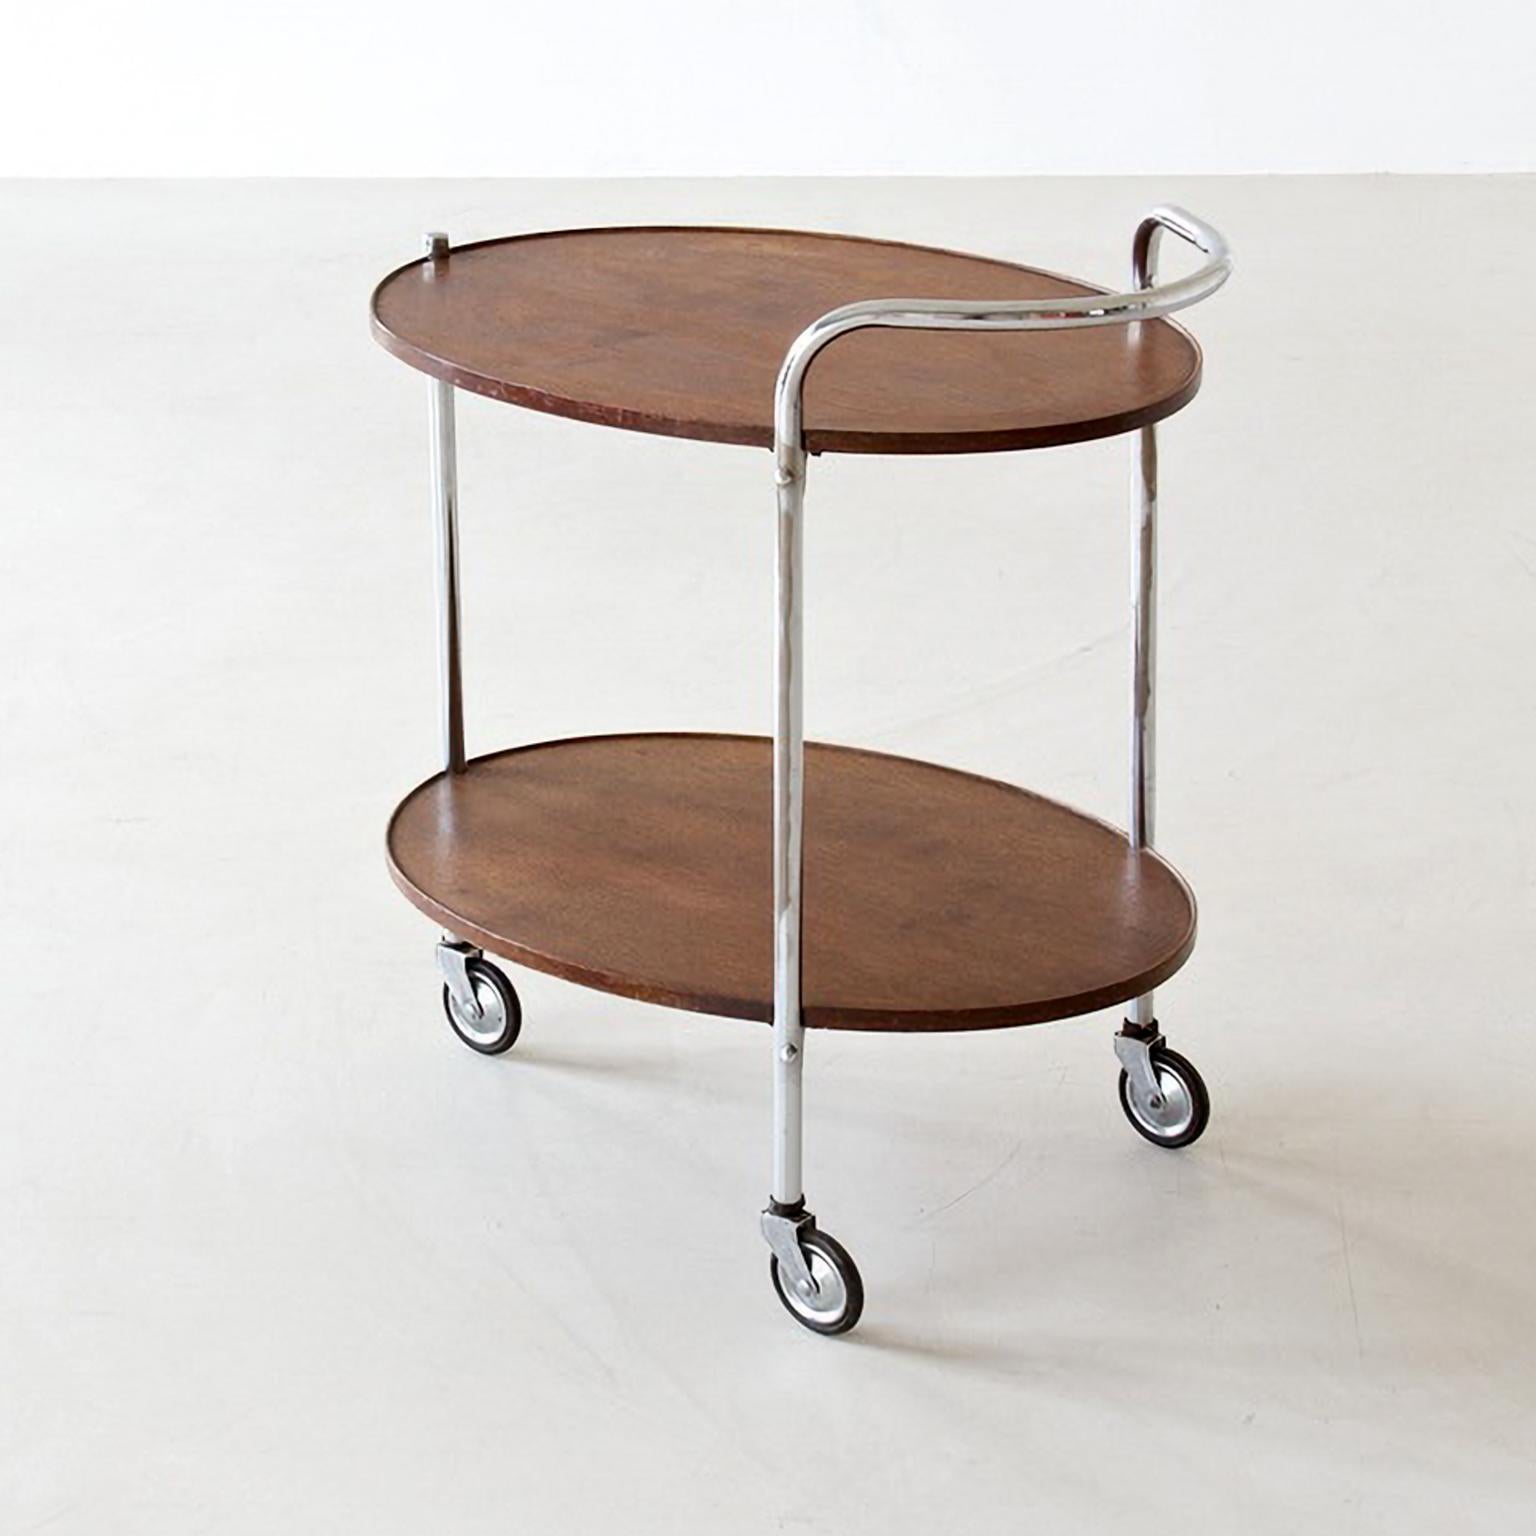 Modernist serving trolley with two oval wooden shelves, chromed metal, circa 1930.